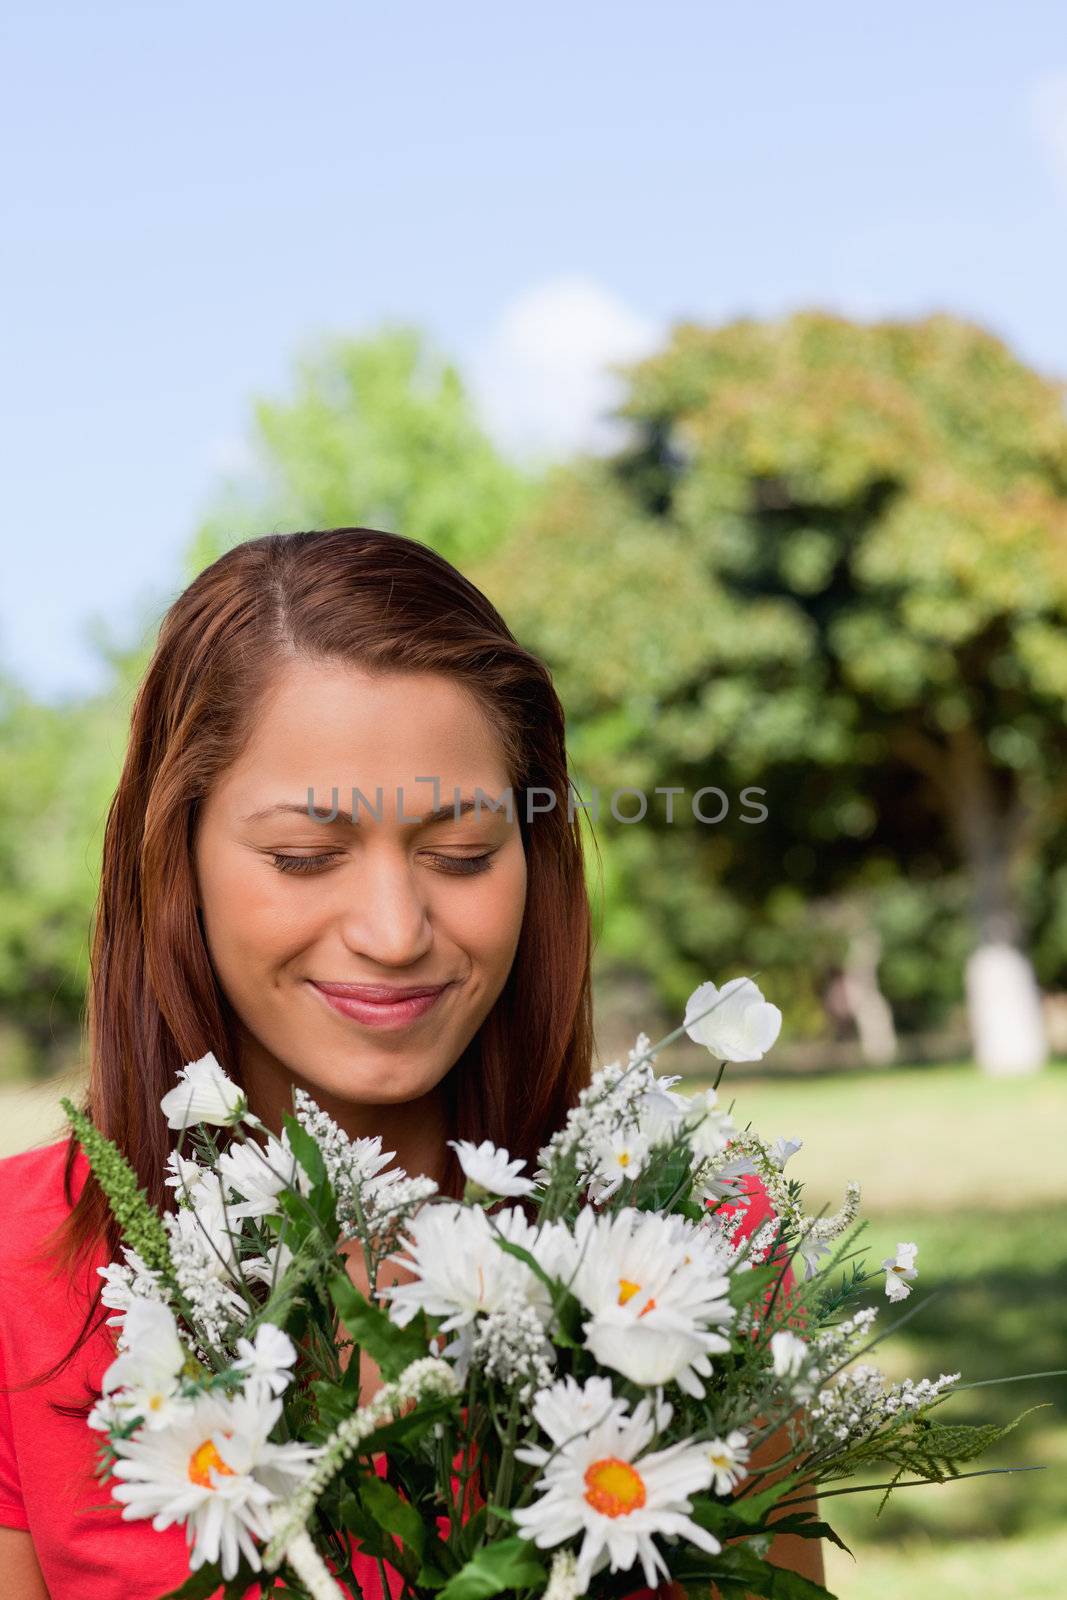 Young woman looking at a bunch of flowers while standing in a sunny parkland area